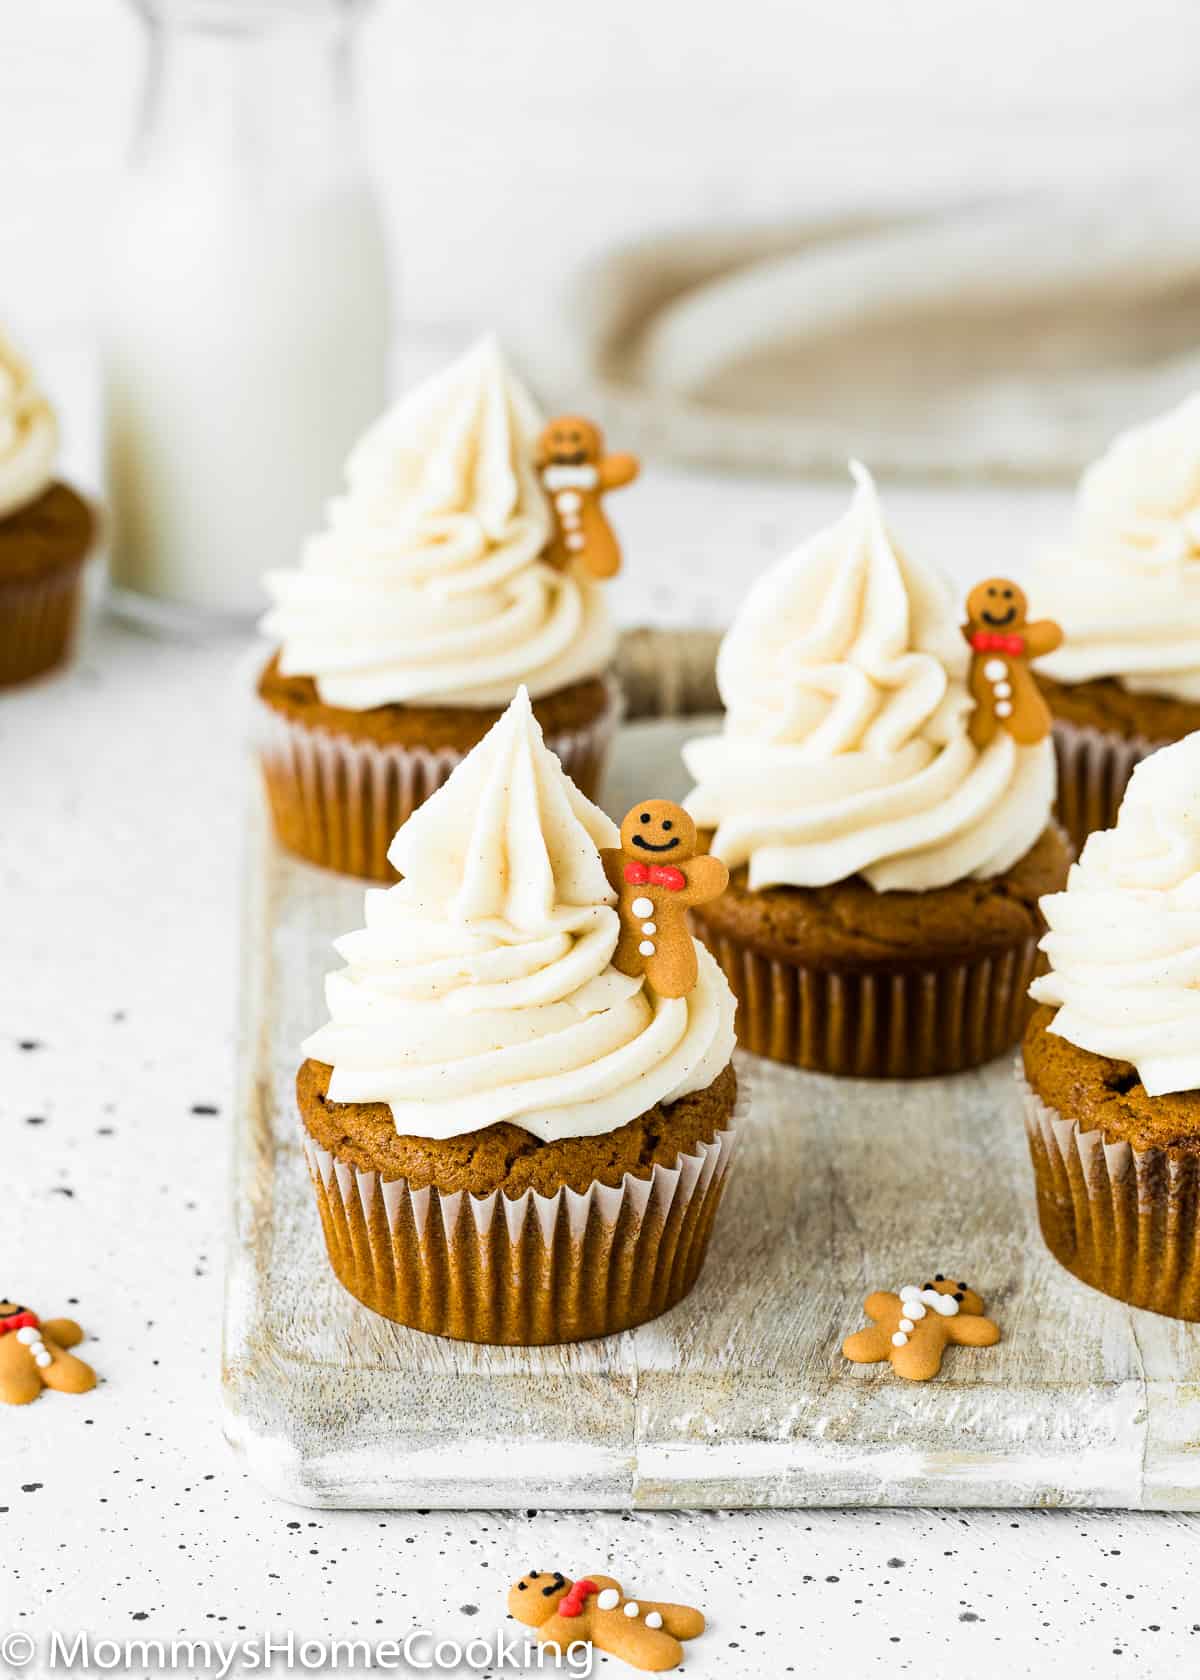 Eggless Gingerbread Cupcakes with cinnamon cream cheese frosting over a wooden surface with a bottle of milk in the background.